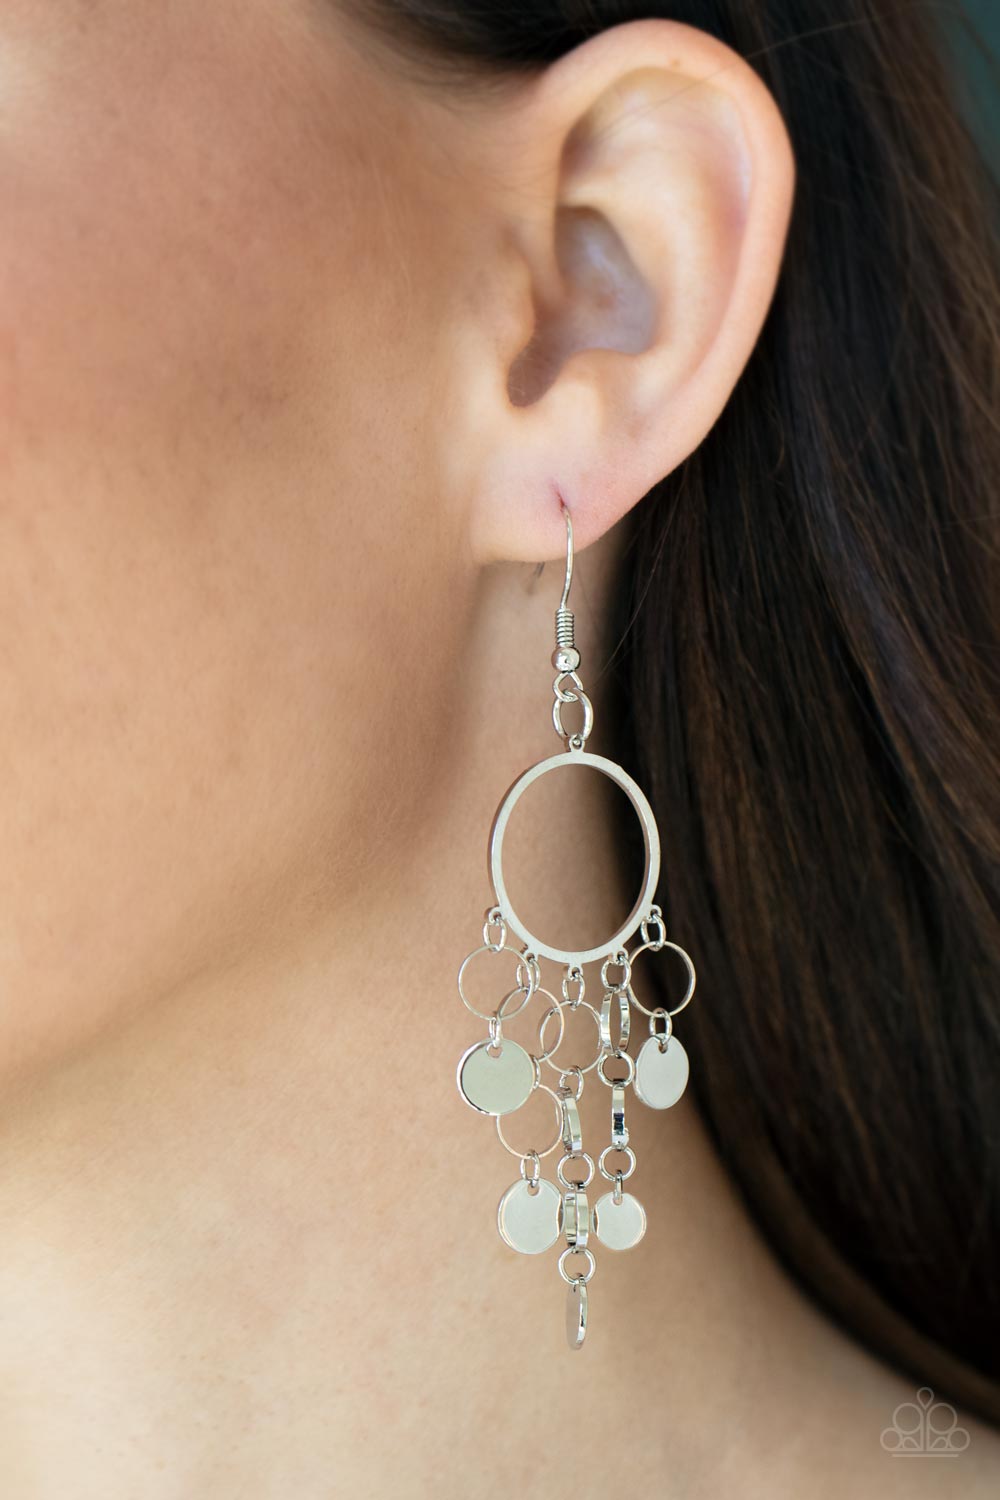 Cyber Chime - Silver Earrings - Princess Glam Shop